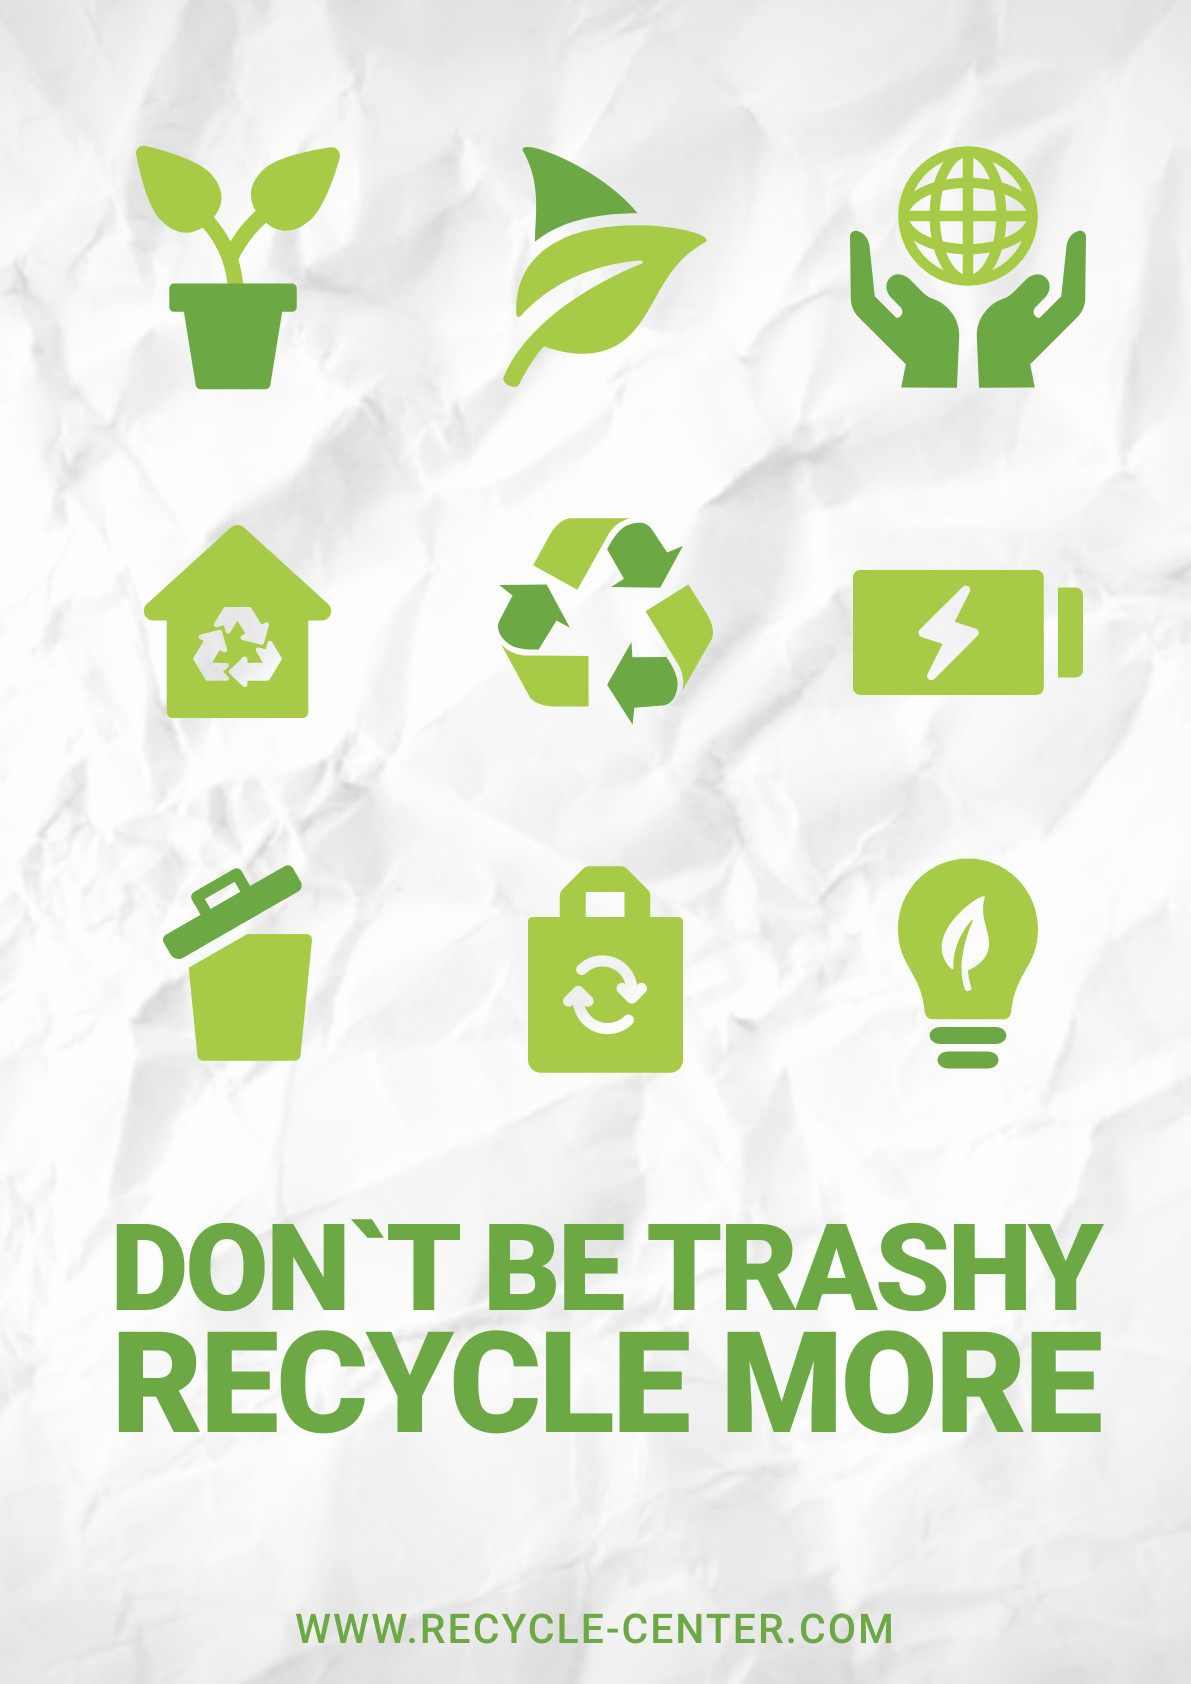 Recycle More Icons – Poster Template 1191x1684